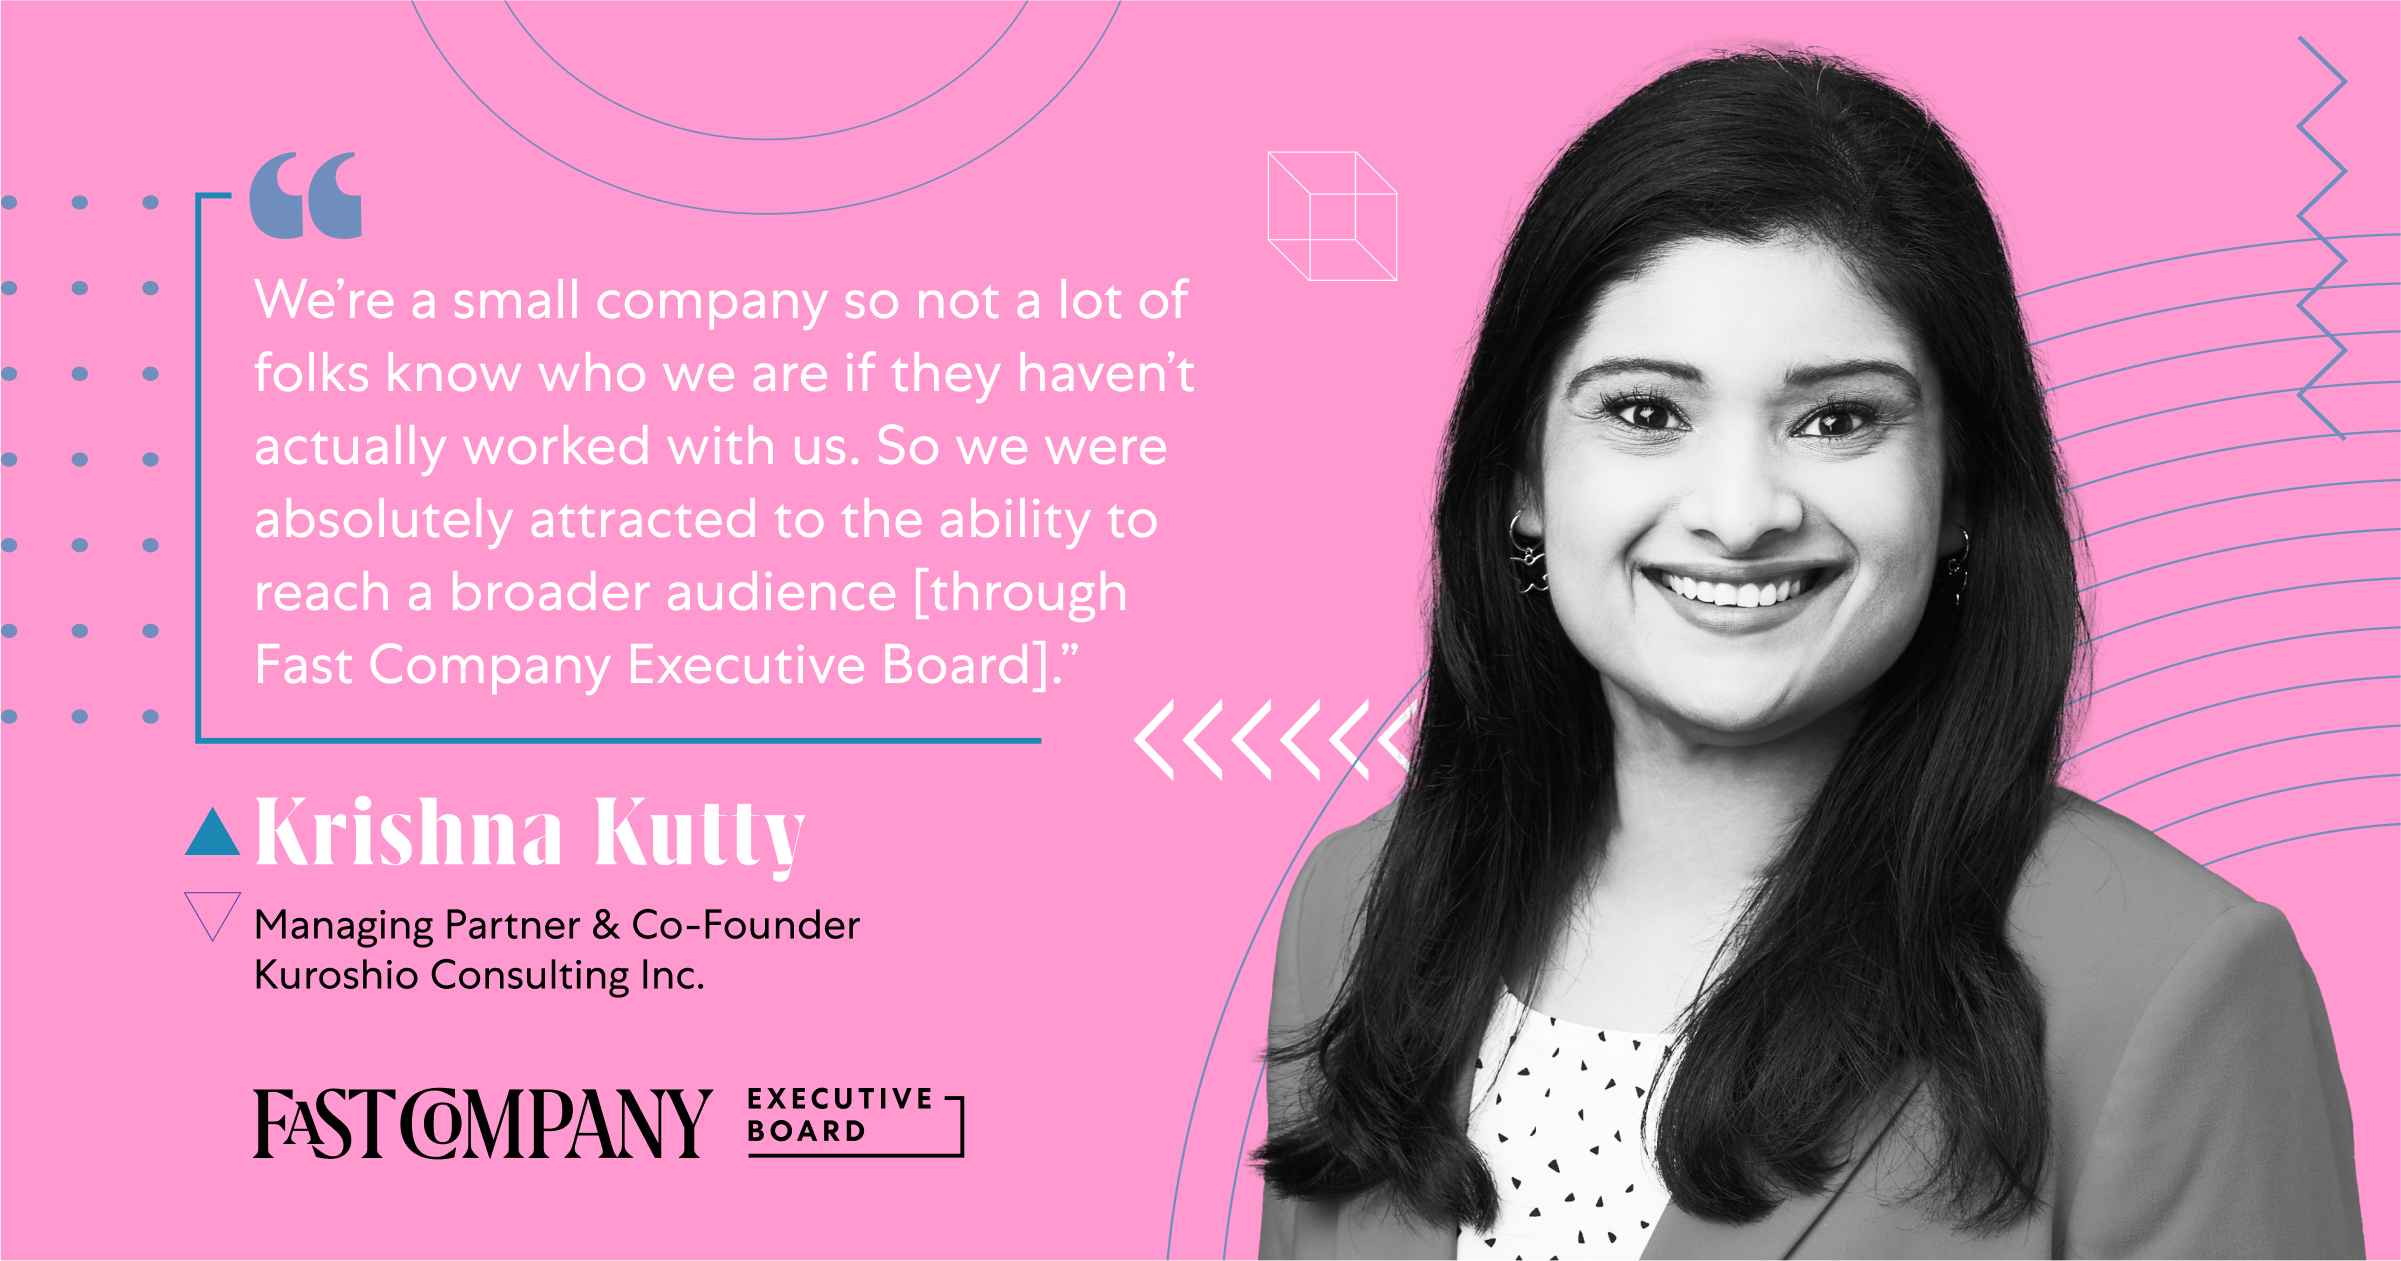 Through Fast Company Executive Board, Krishna Kutty Reaches a Wider Audience for Thought Leadership